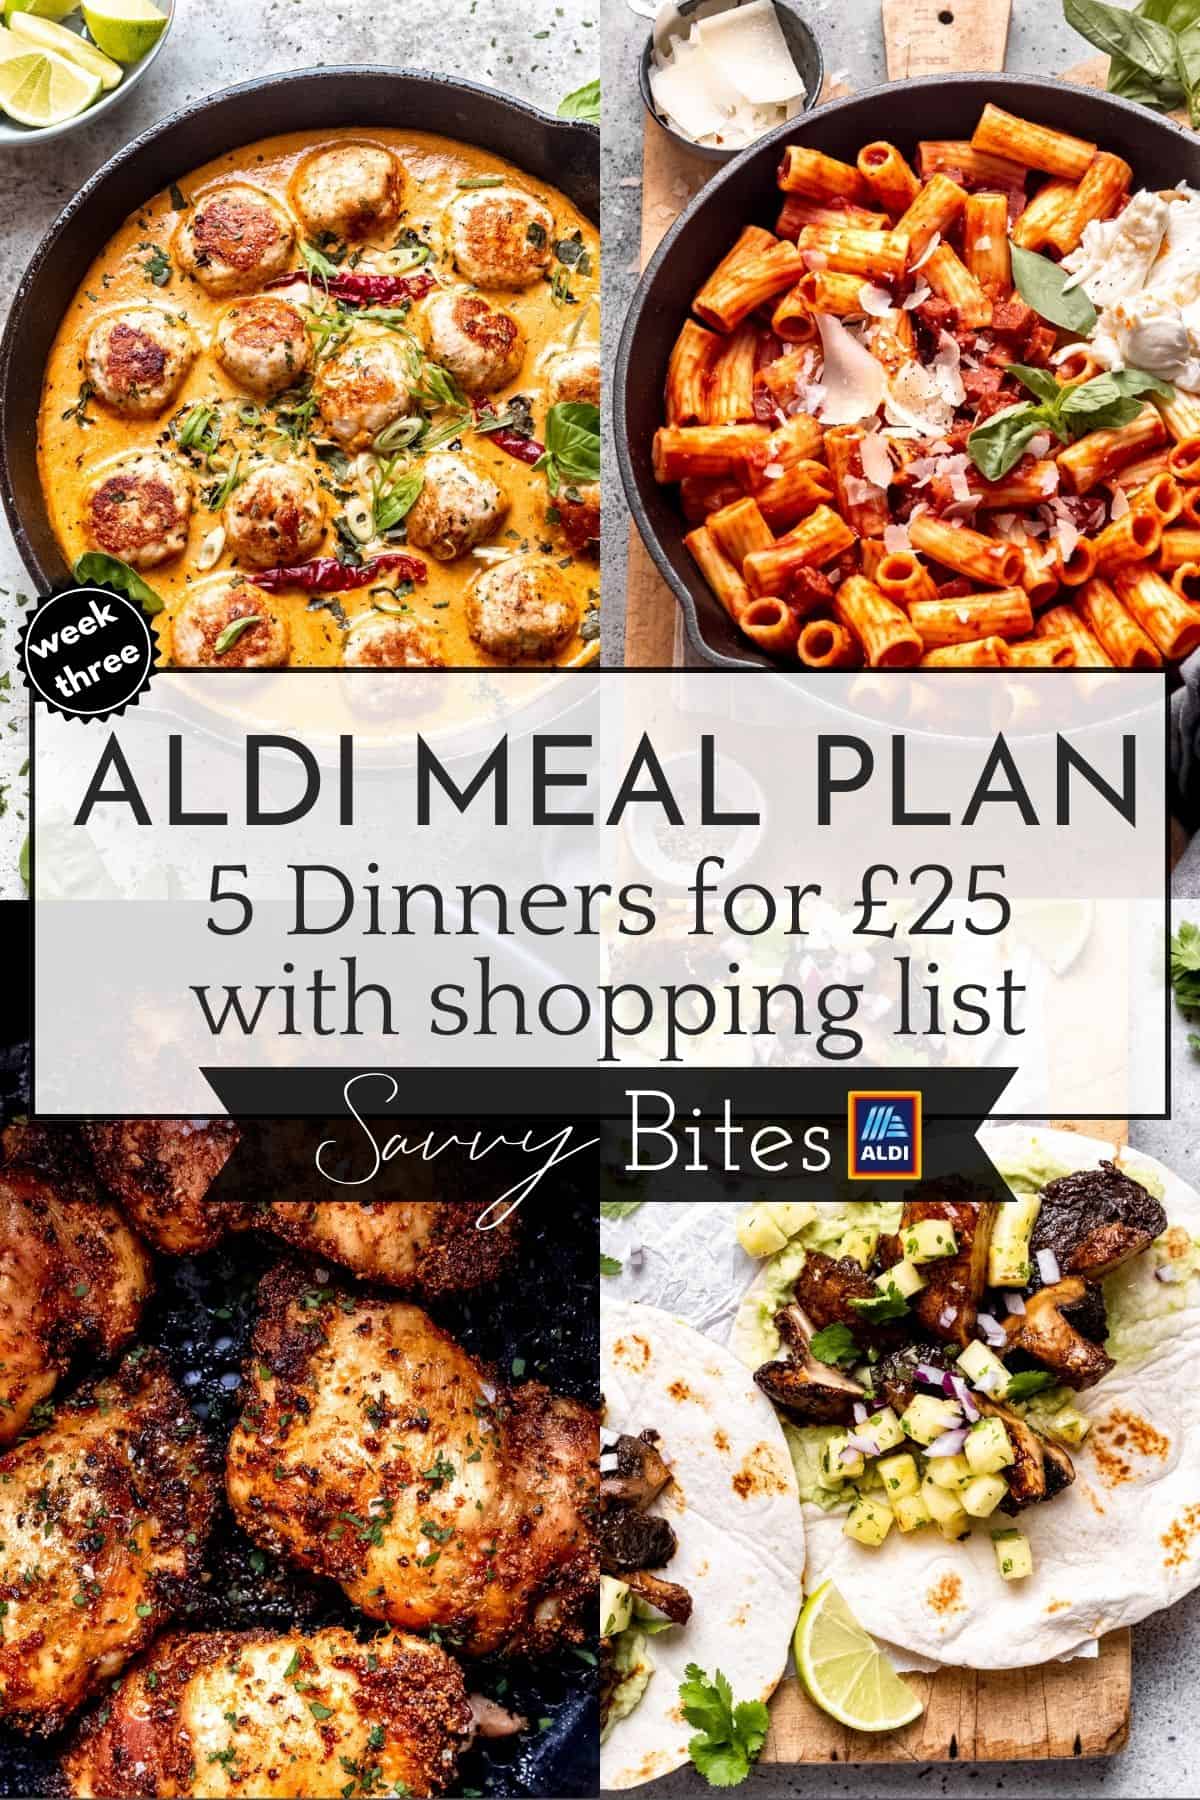 Photo Collage for £25 Meal Plan.